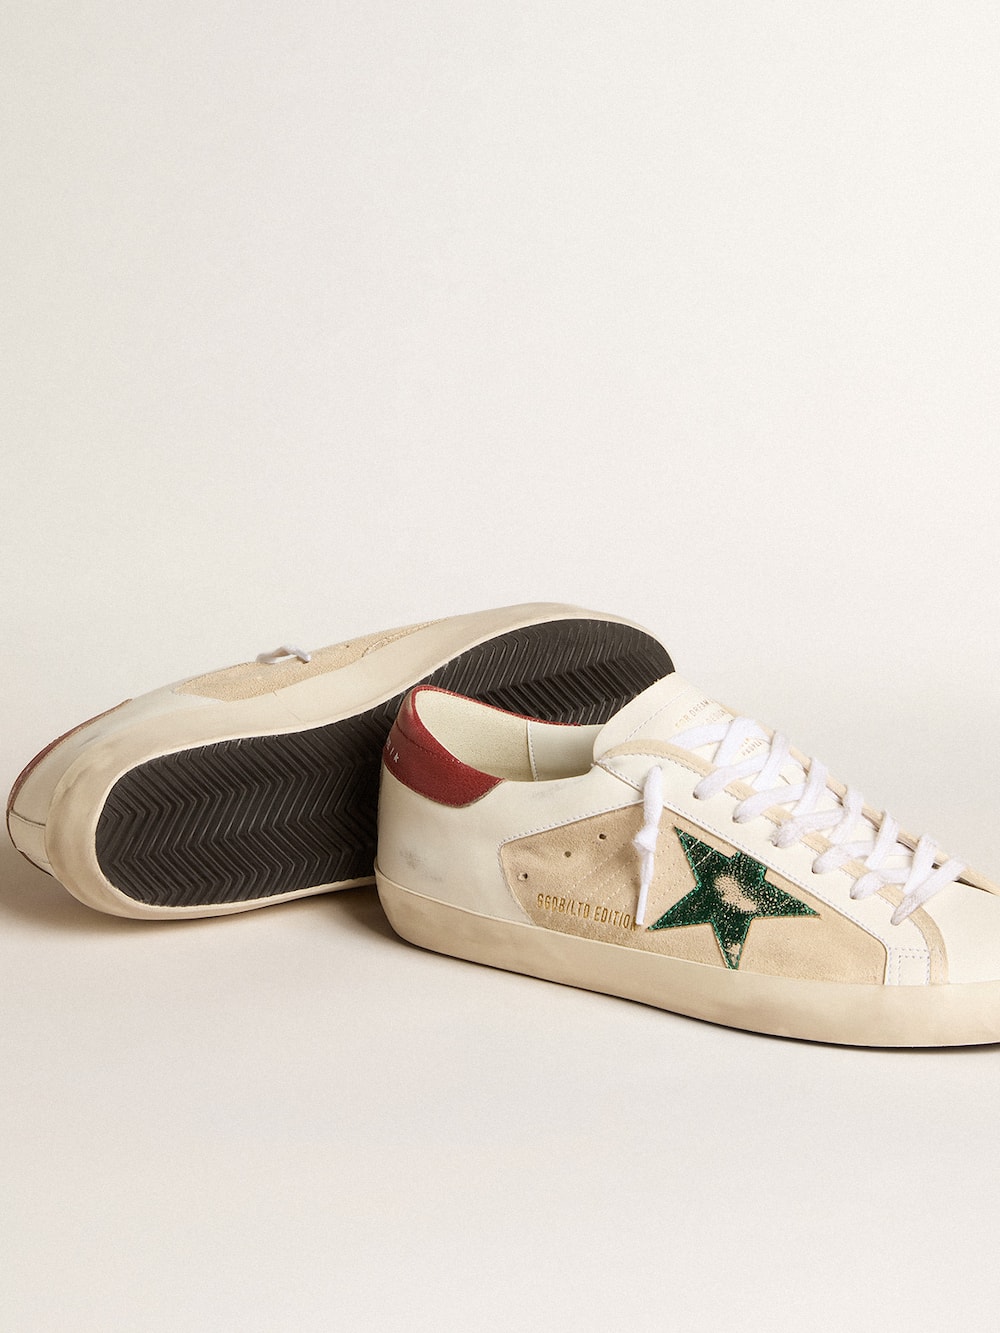 Golden Goose - Super-Star LTD in suede with green metallic star and red heel tab in 